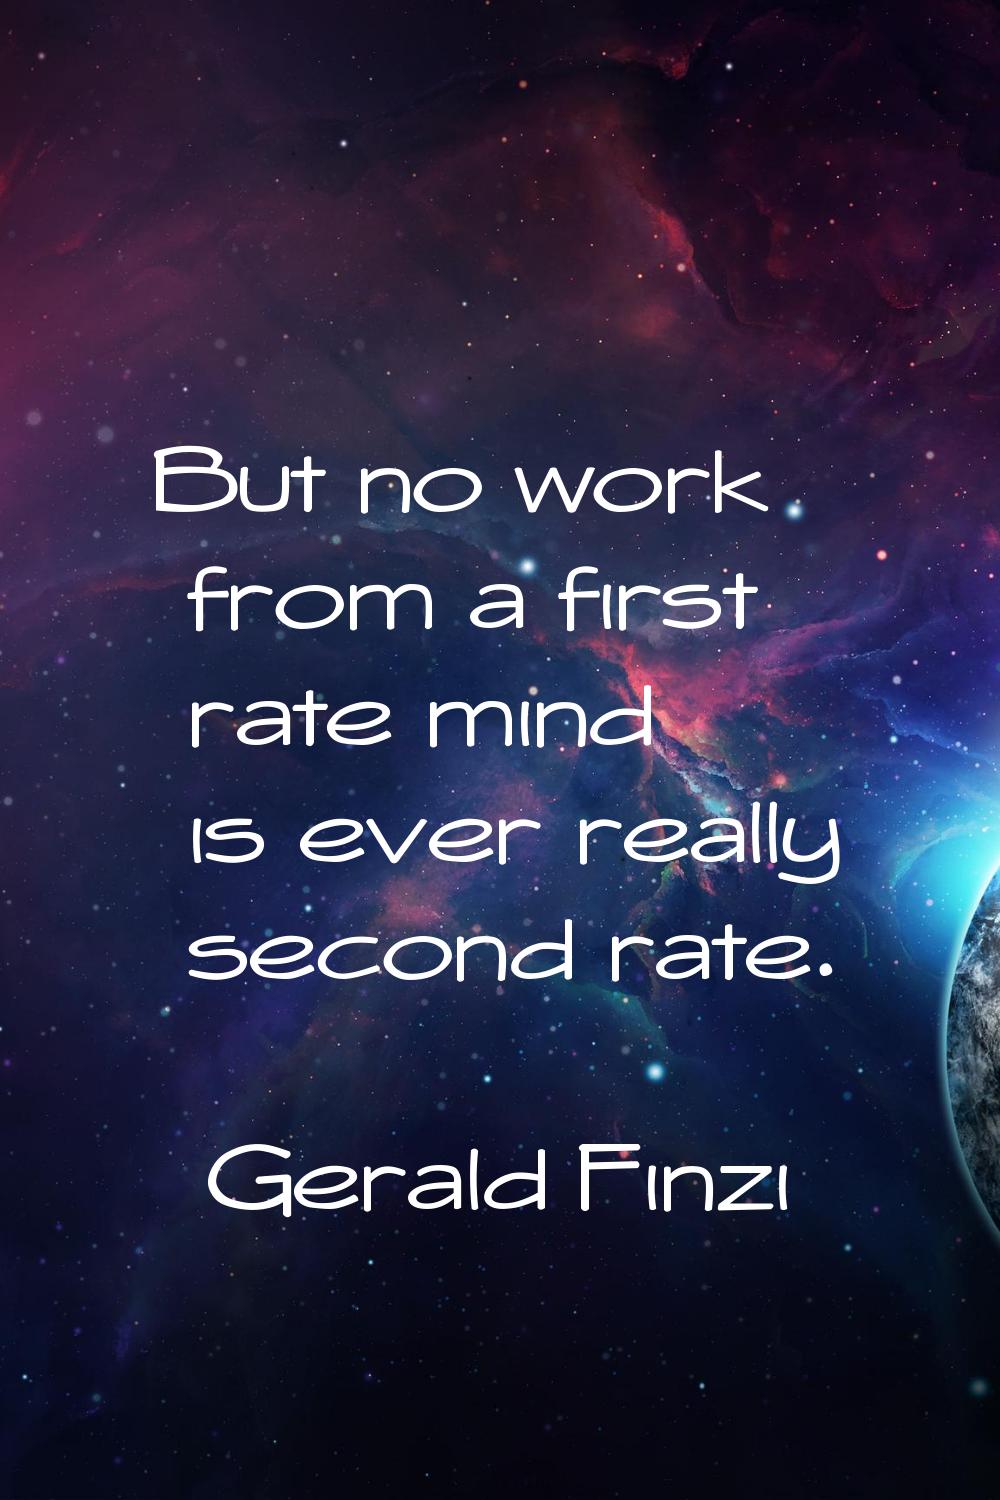 But no work from a first rate mind is ever really second rate.